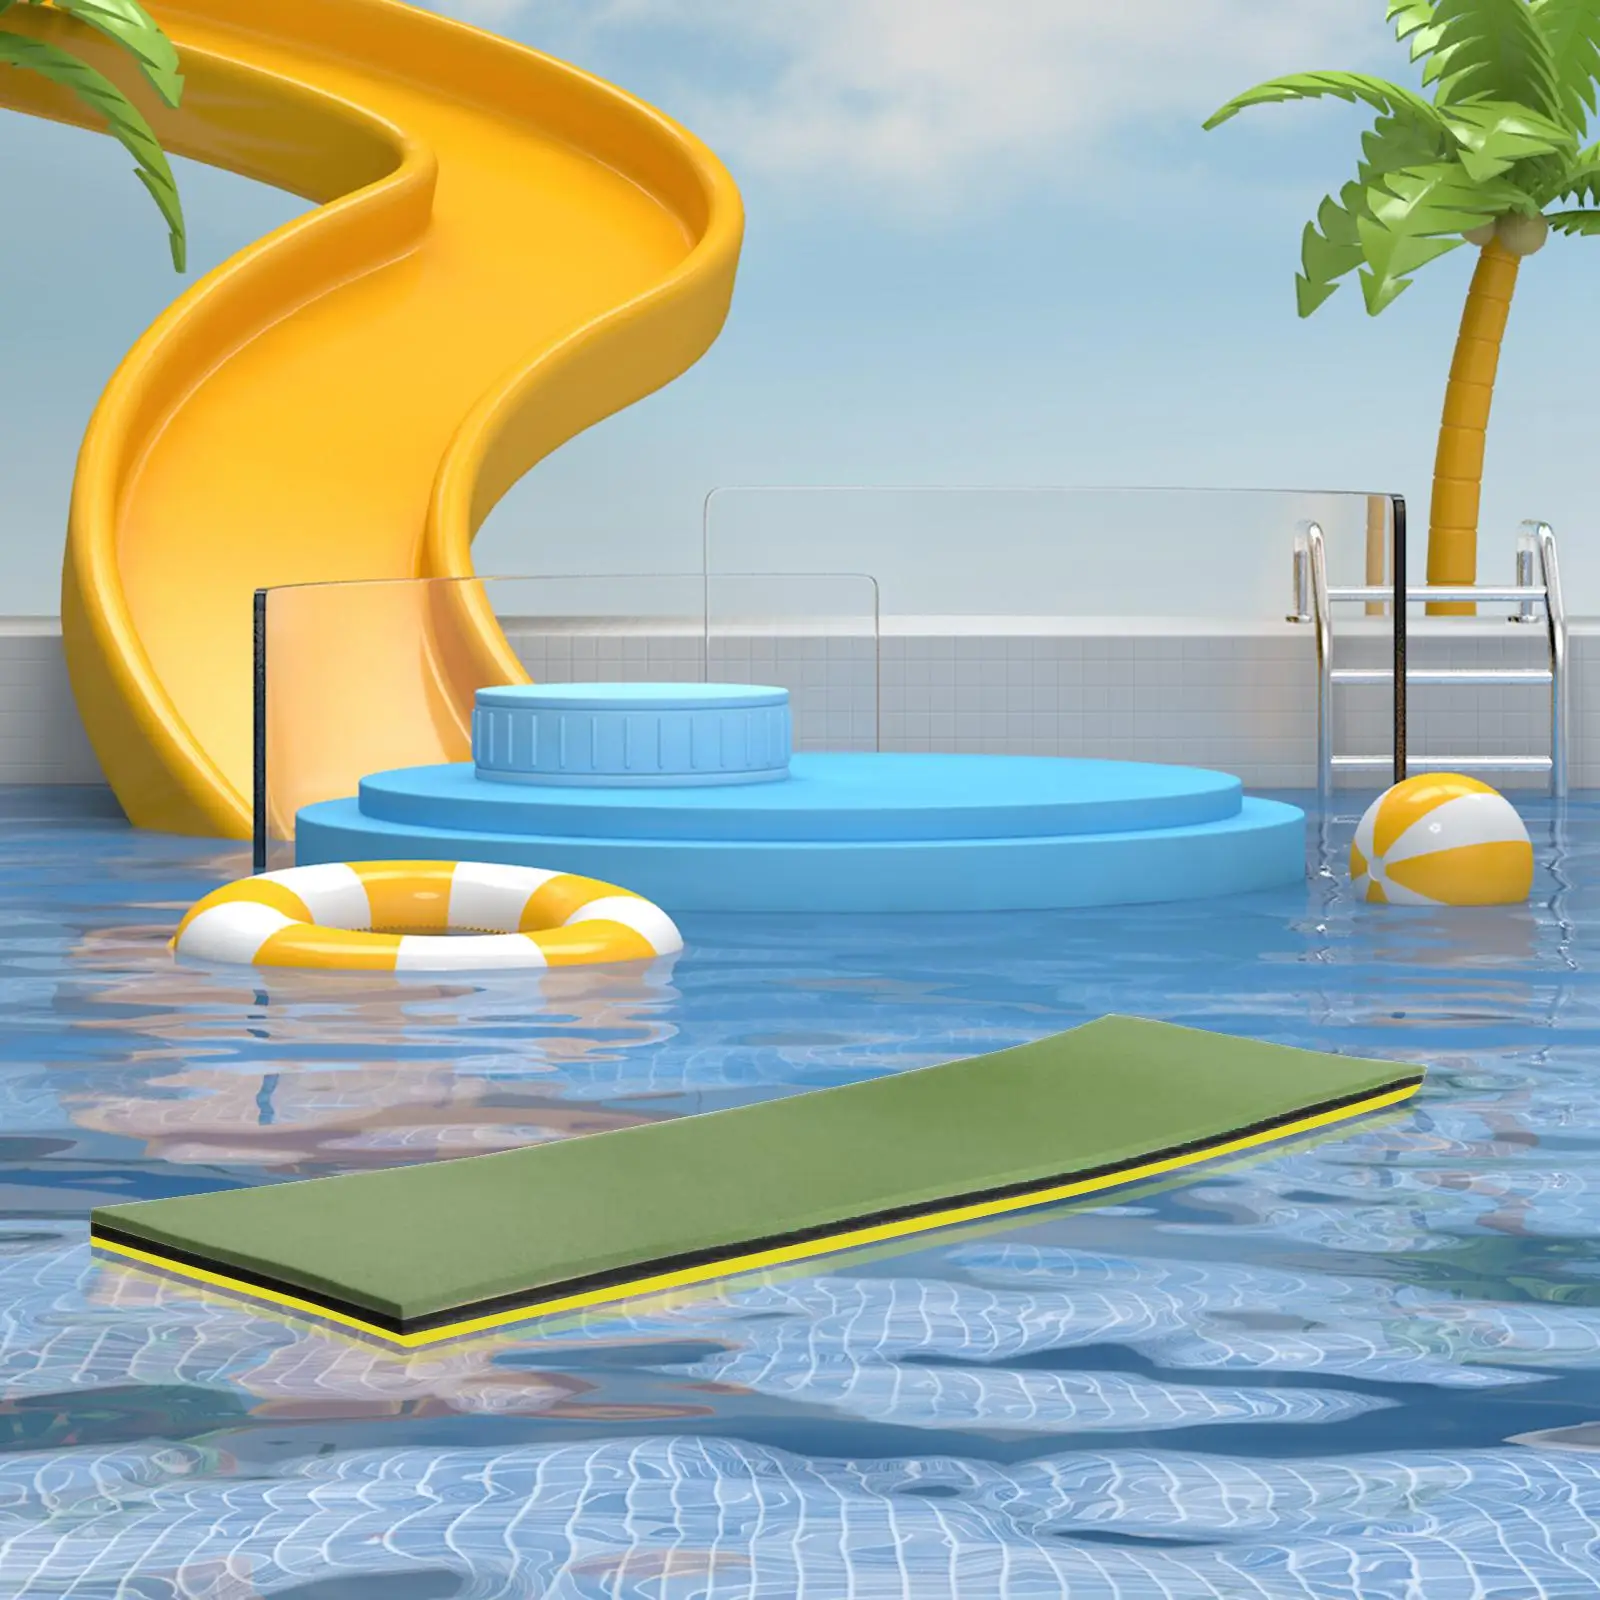 Floating Mat Water Pad Cushion 43x15.7x1.3inch for Fresh Water and Salt Water Portable Durable Xpe Foam Mat Yellow Black Green